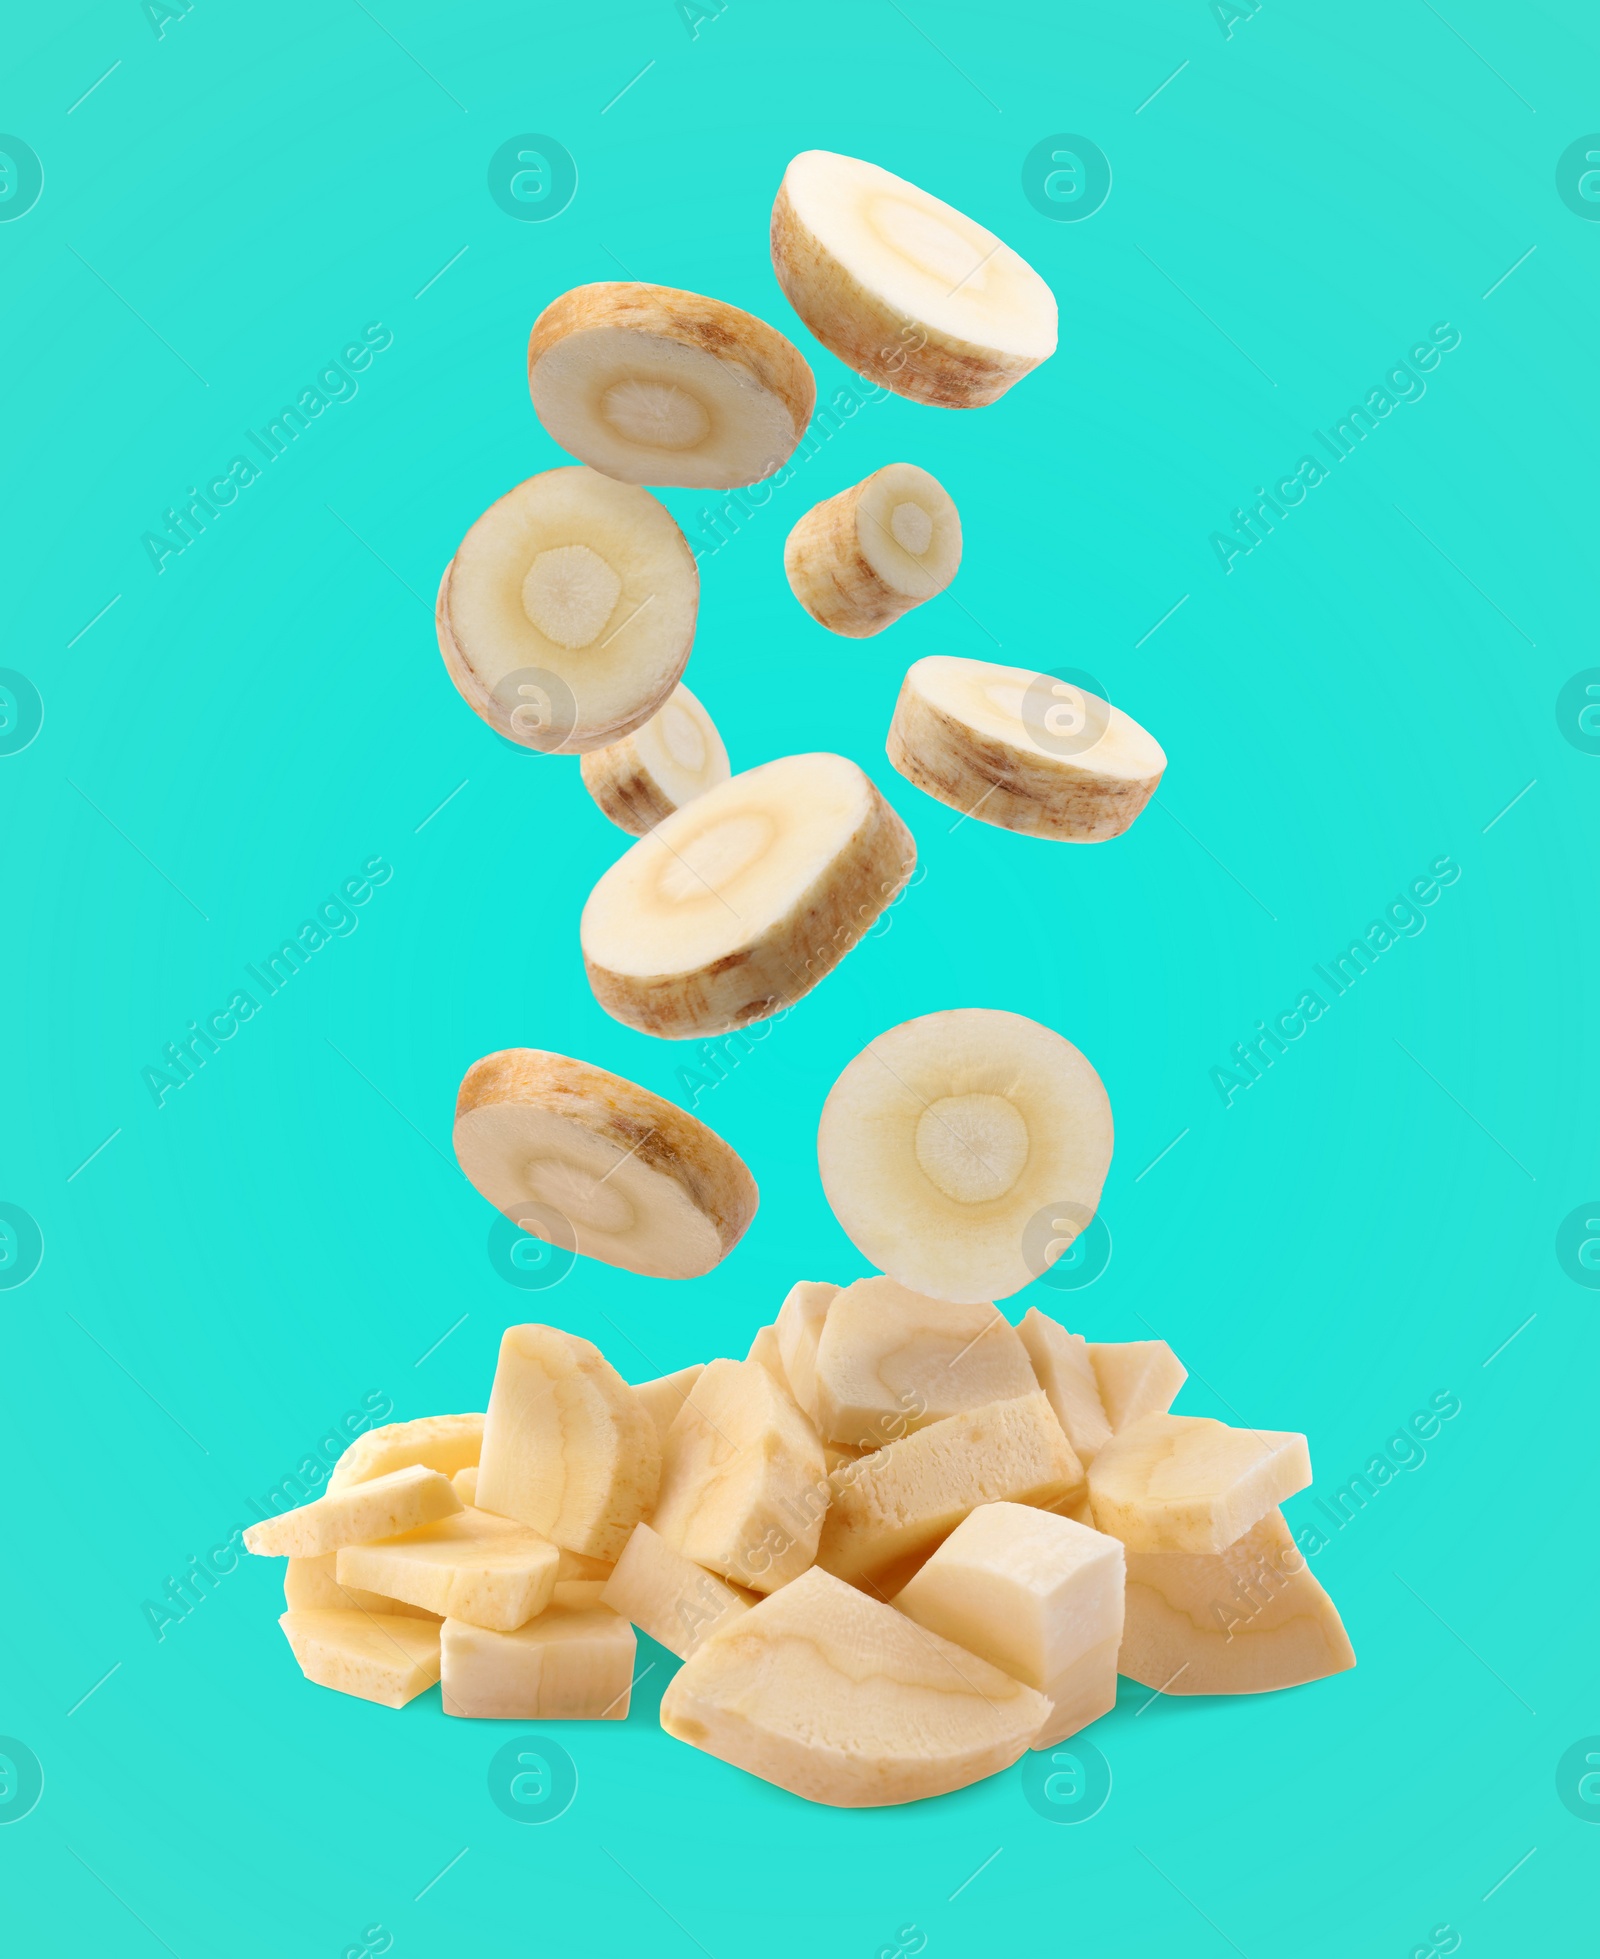 Image of Pieces of parsnip root falling into pile on turquoise background